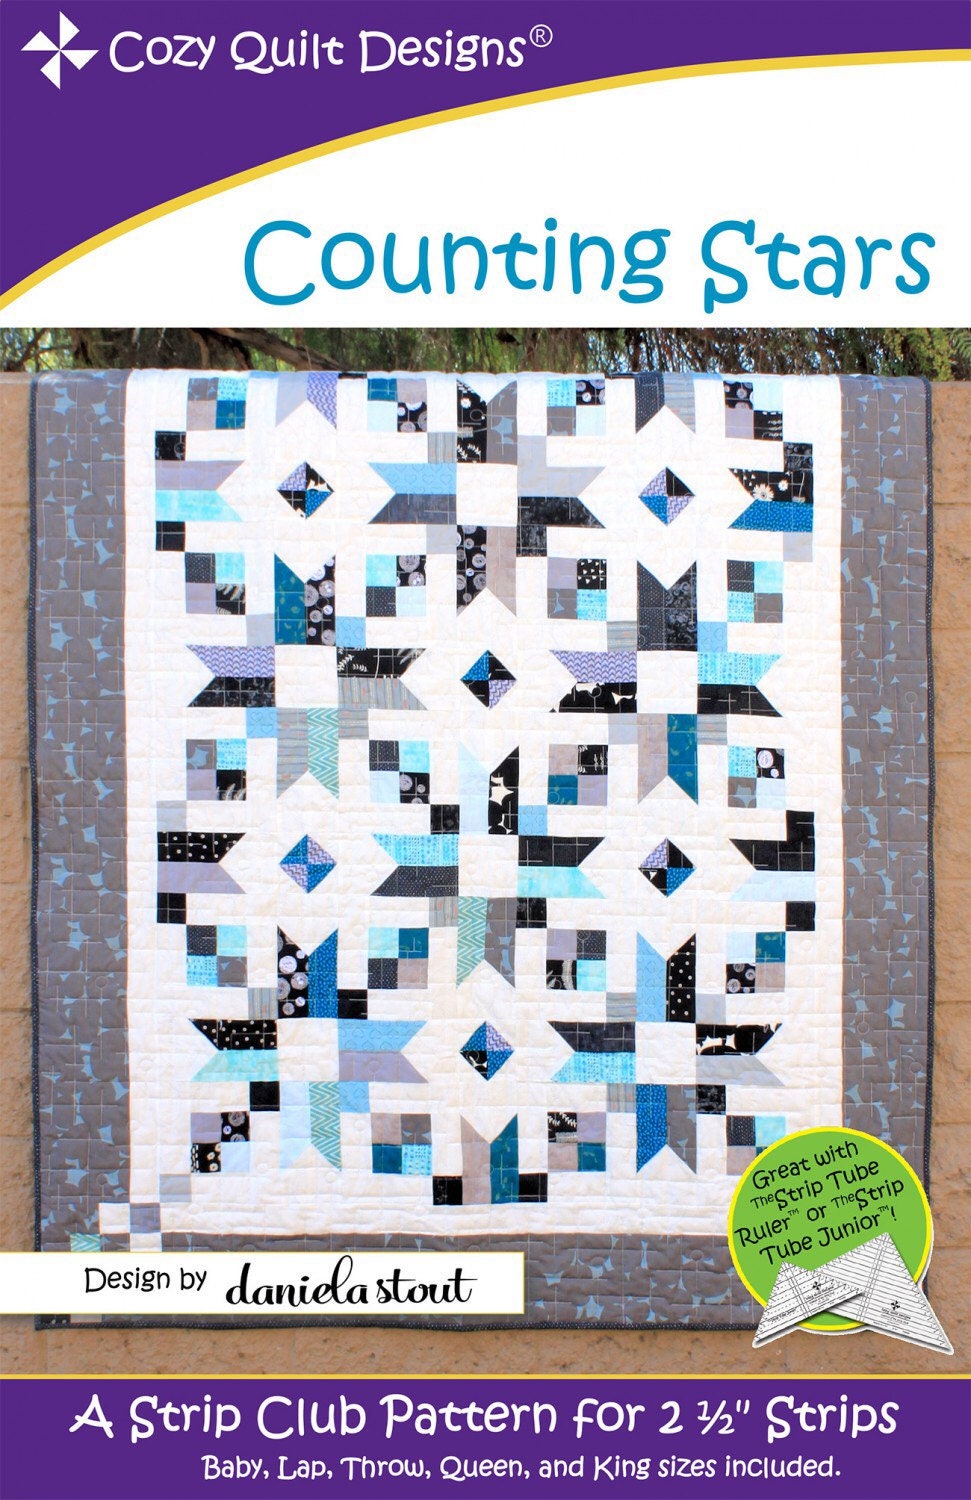 Counting Stars Quilt Pattern - Cozy Quilt Designs - Georgette Dell’Orco - Jelly Roll Friendly - 5 sizes